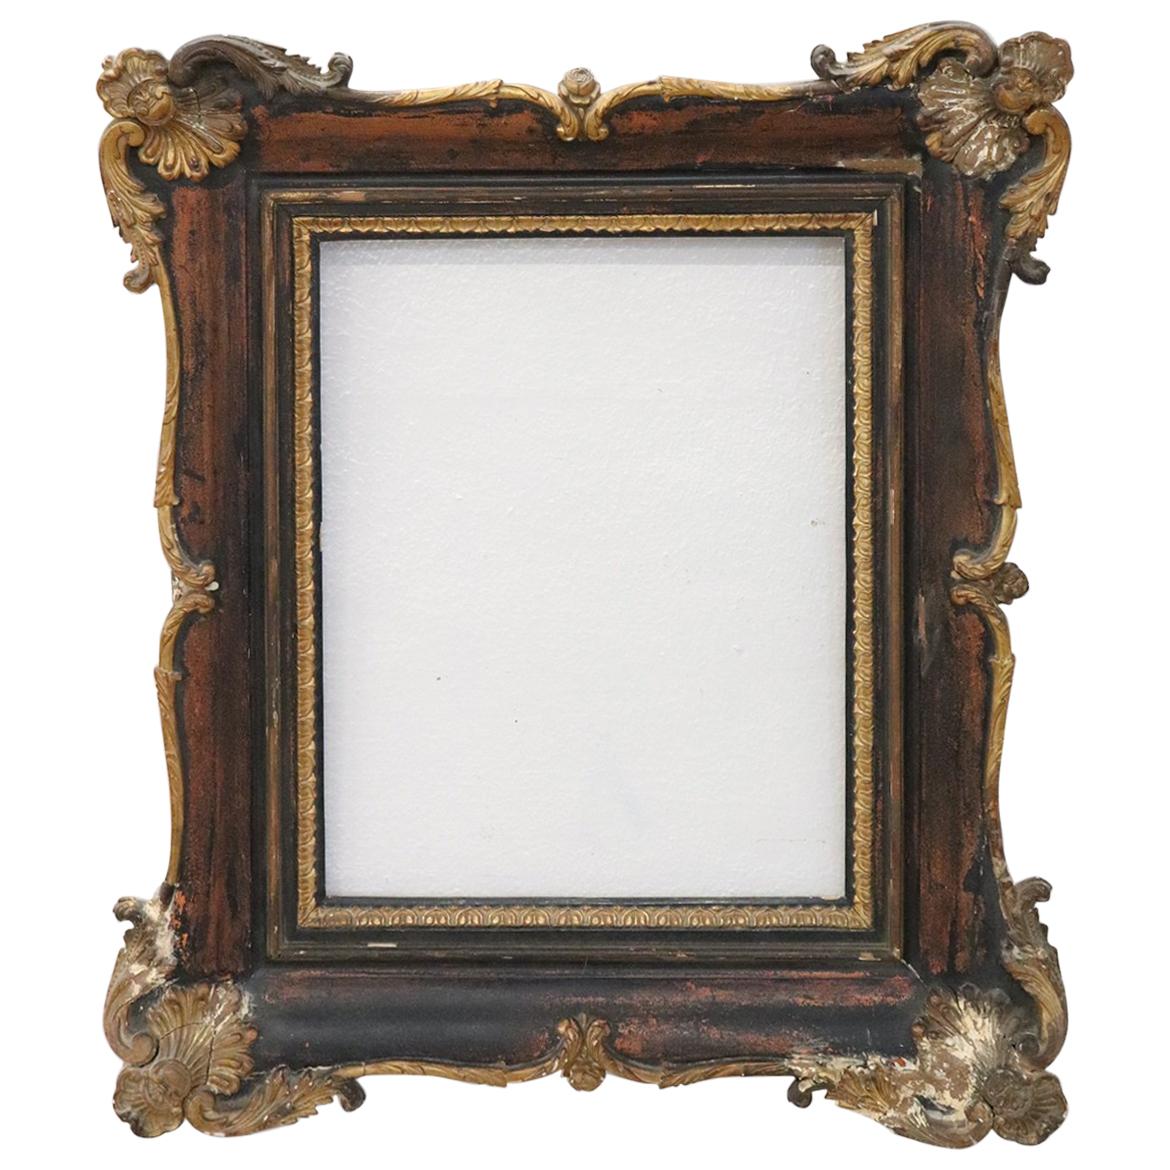 20th Century Italian Wood and Plaster Frame with Golden Decoration